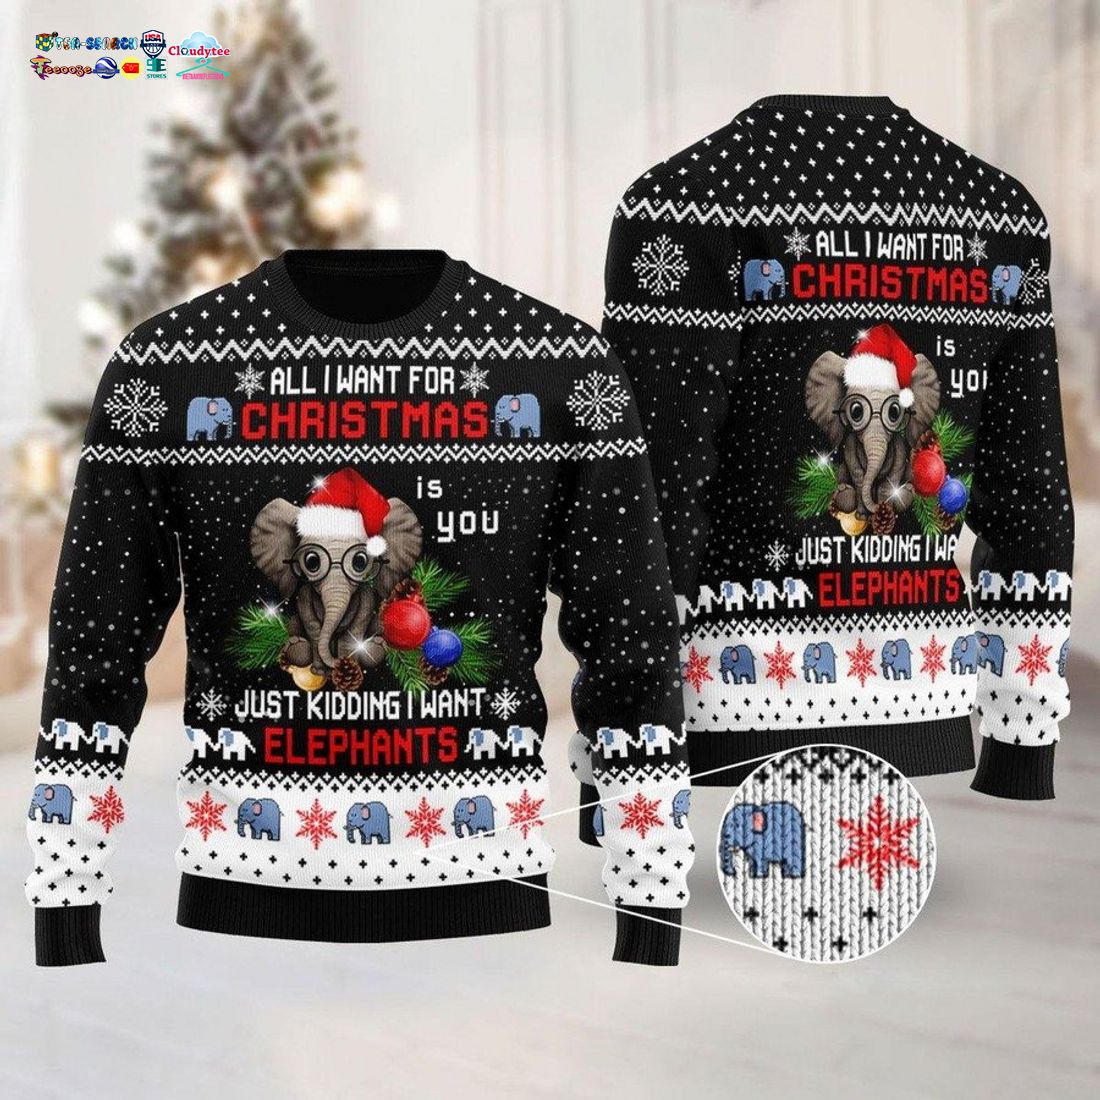 All I Want For Christmas Is You Just Kidding I Want Elephants Ugly Christmas Sweater